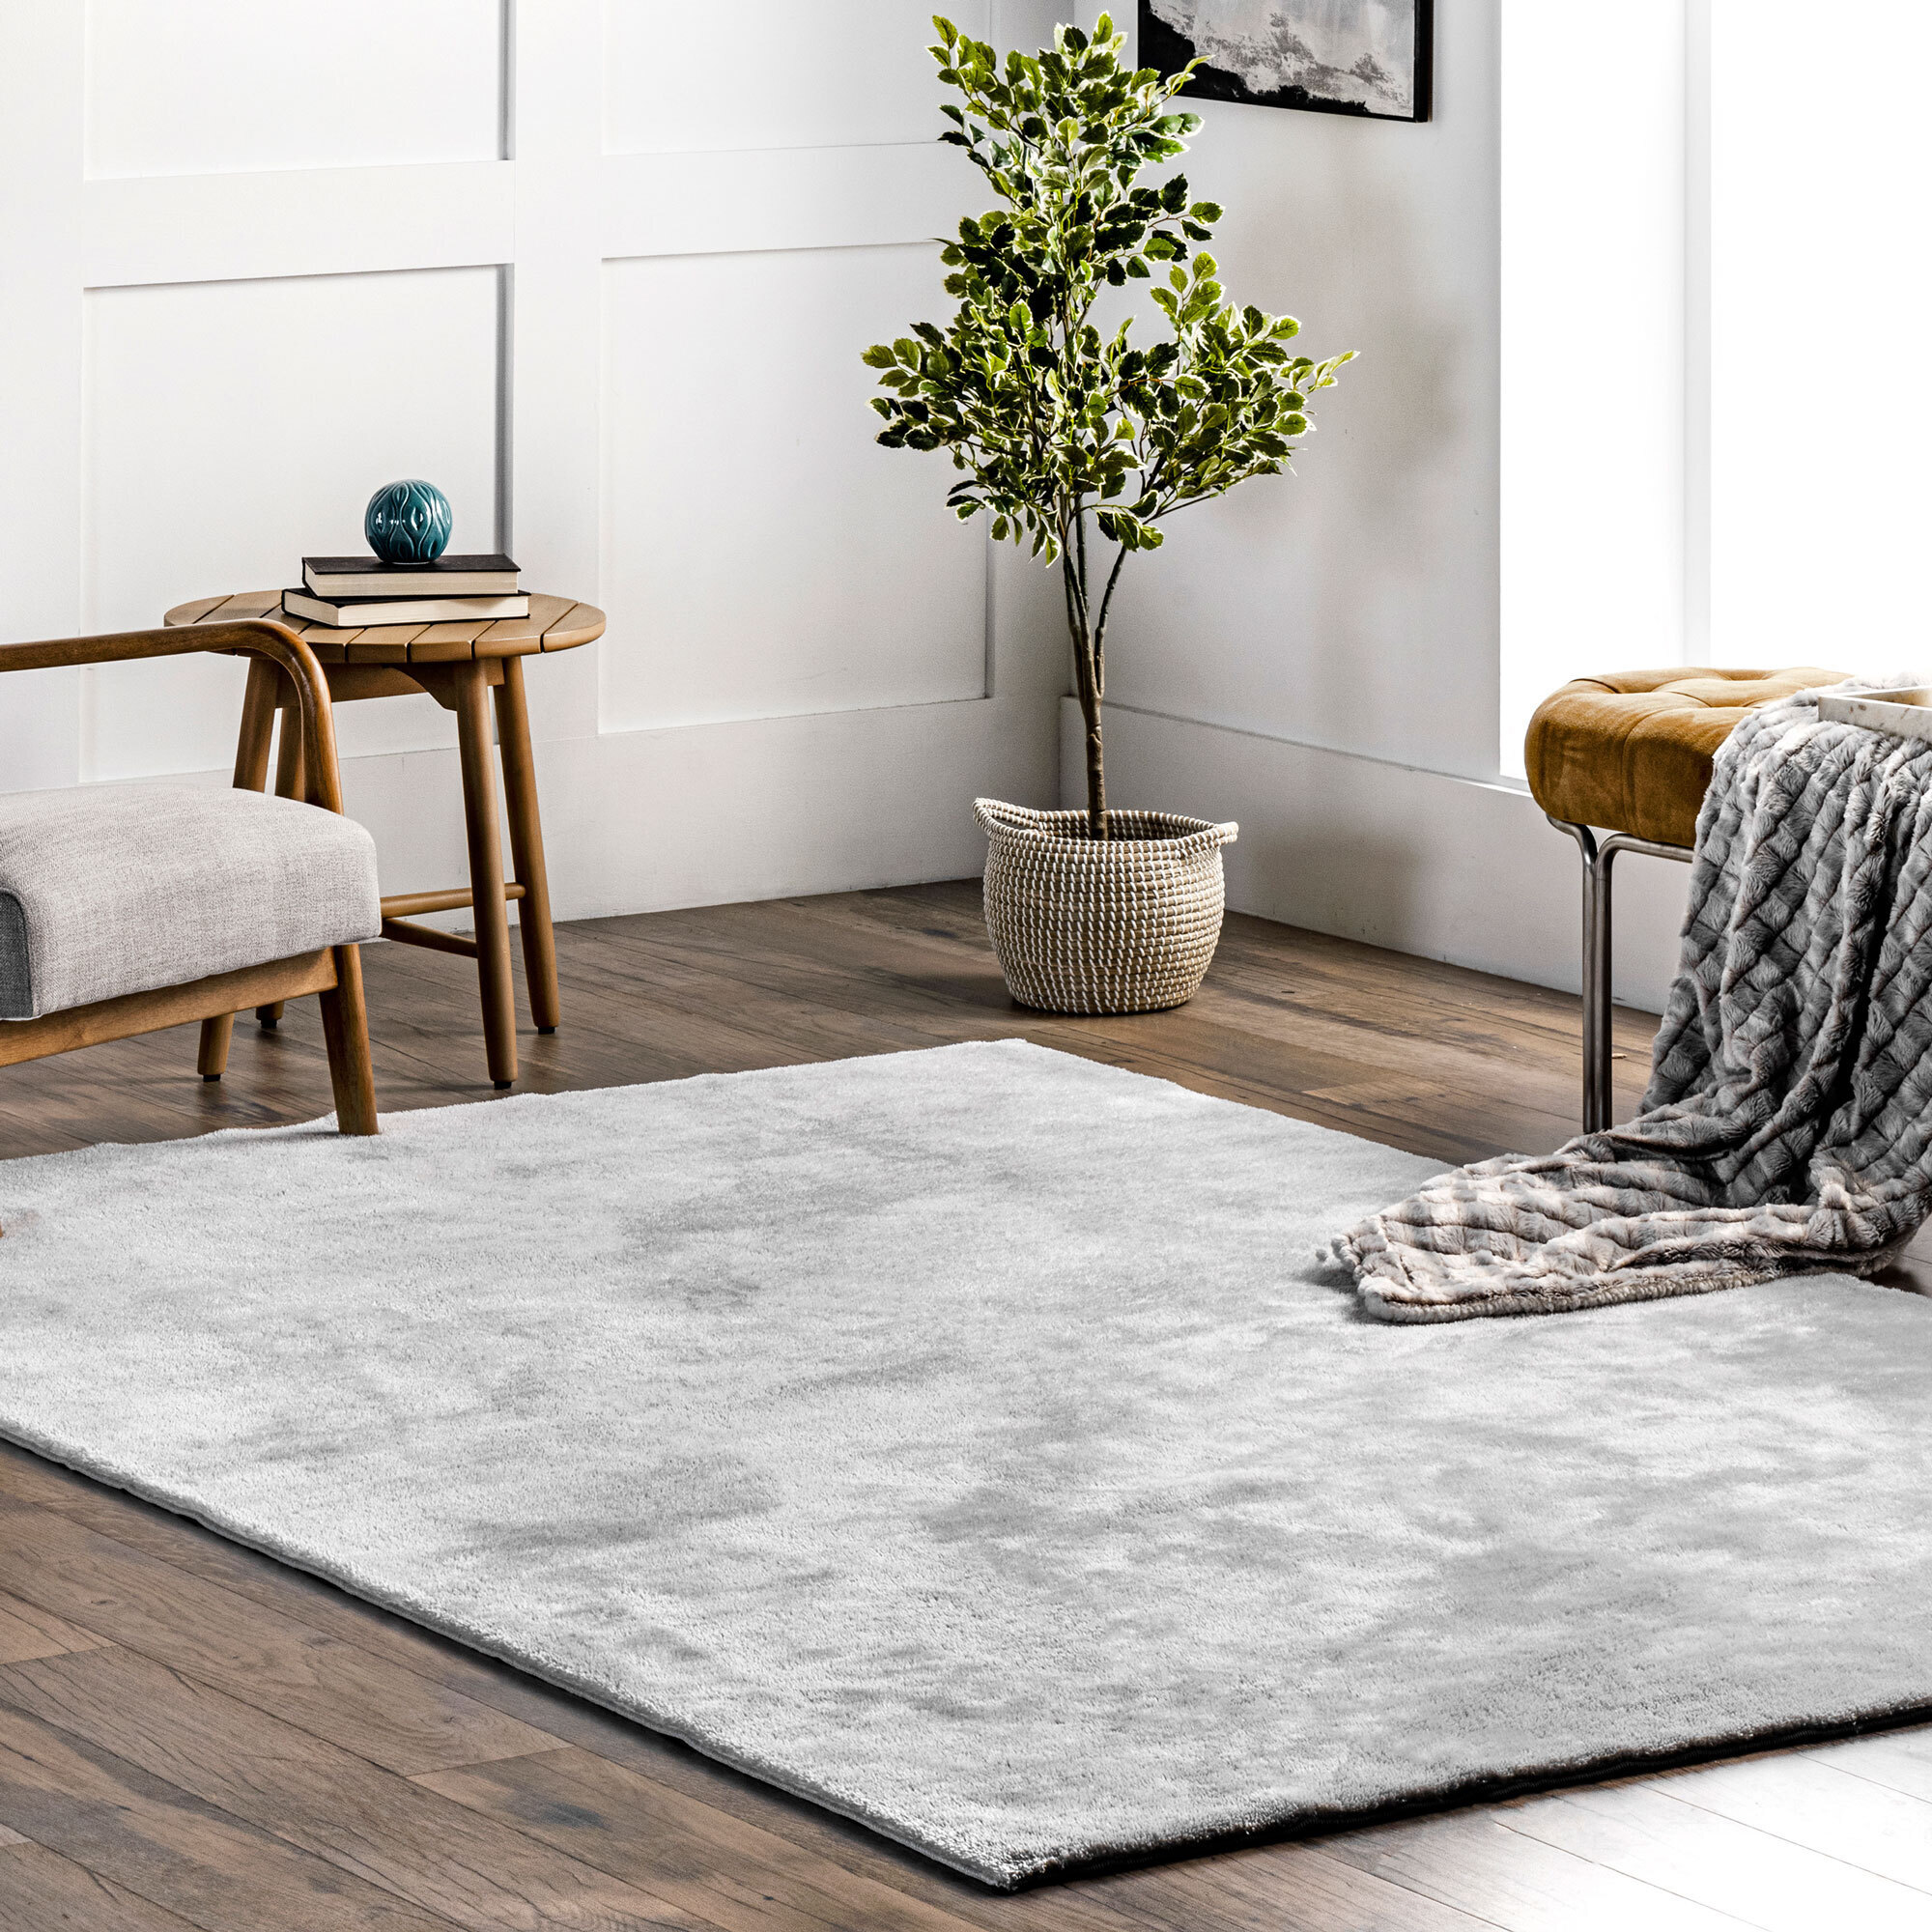 Jones Washable Rug JONPLA-LTGREY [Weaves: Power Loomed] [Materials: Synthetics] [Price: $$] [Style: Washable] [Size: 170x120 cm] [Colours: Black & Gre